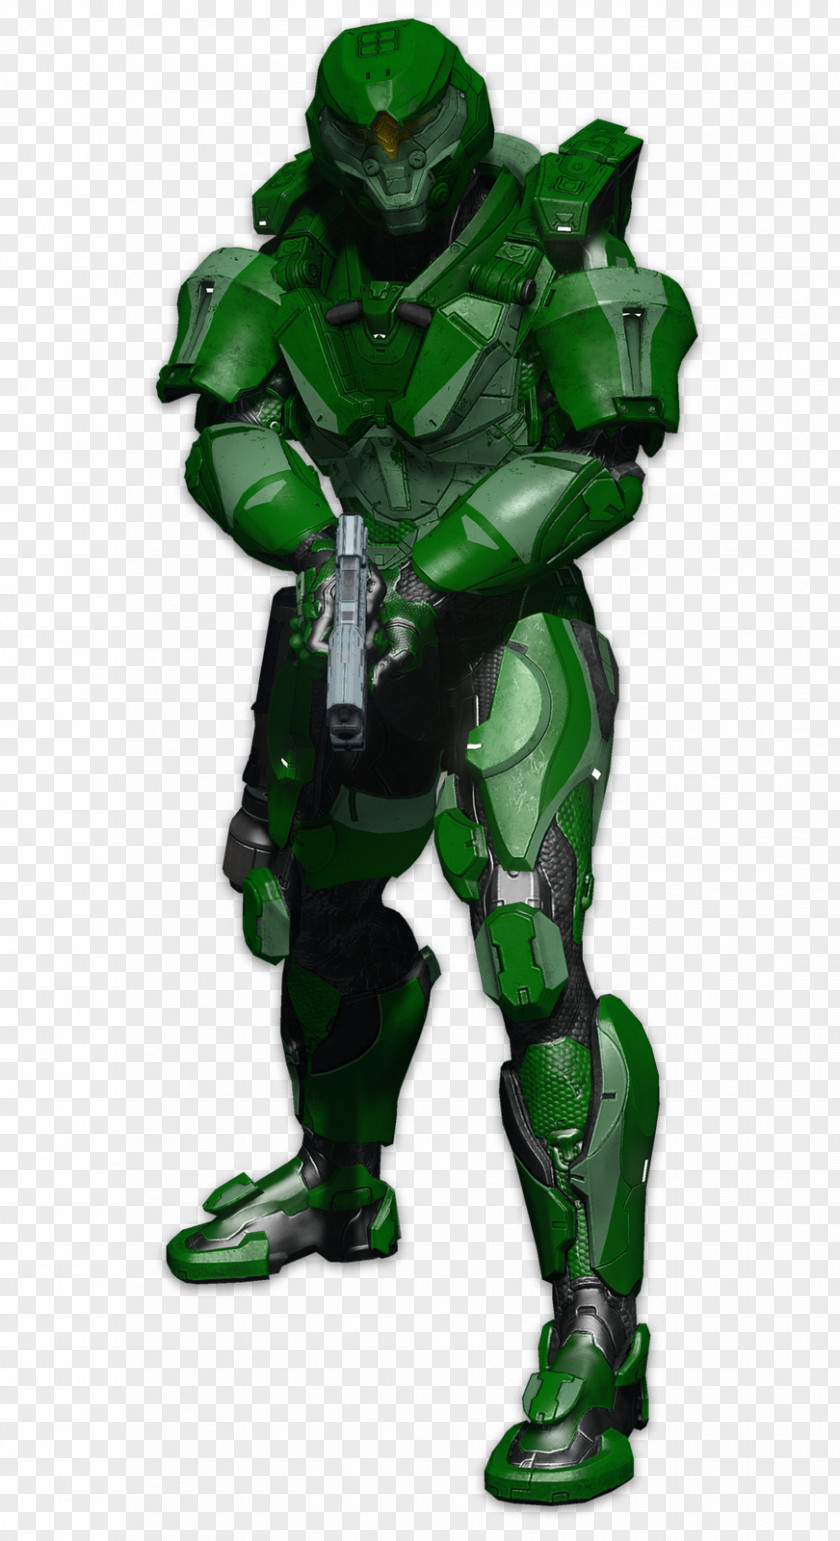 Halo Wars 4 Halo: Spartan Assault Reach The Master Chief Collection PNG